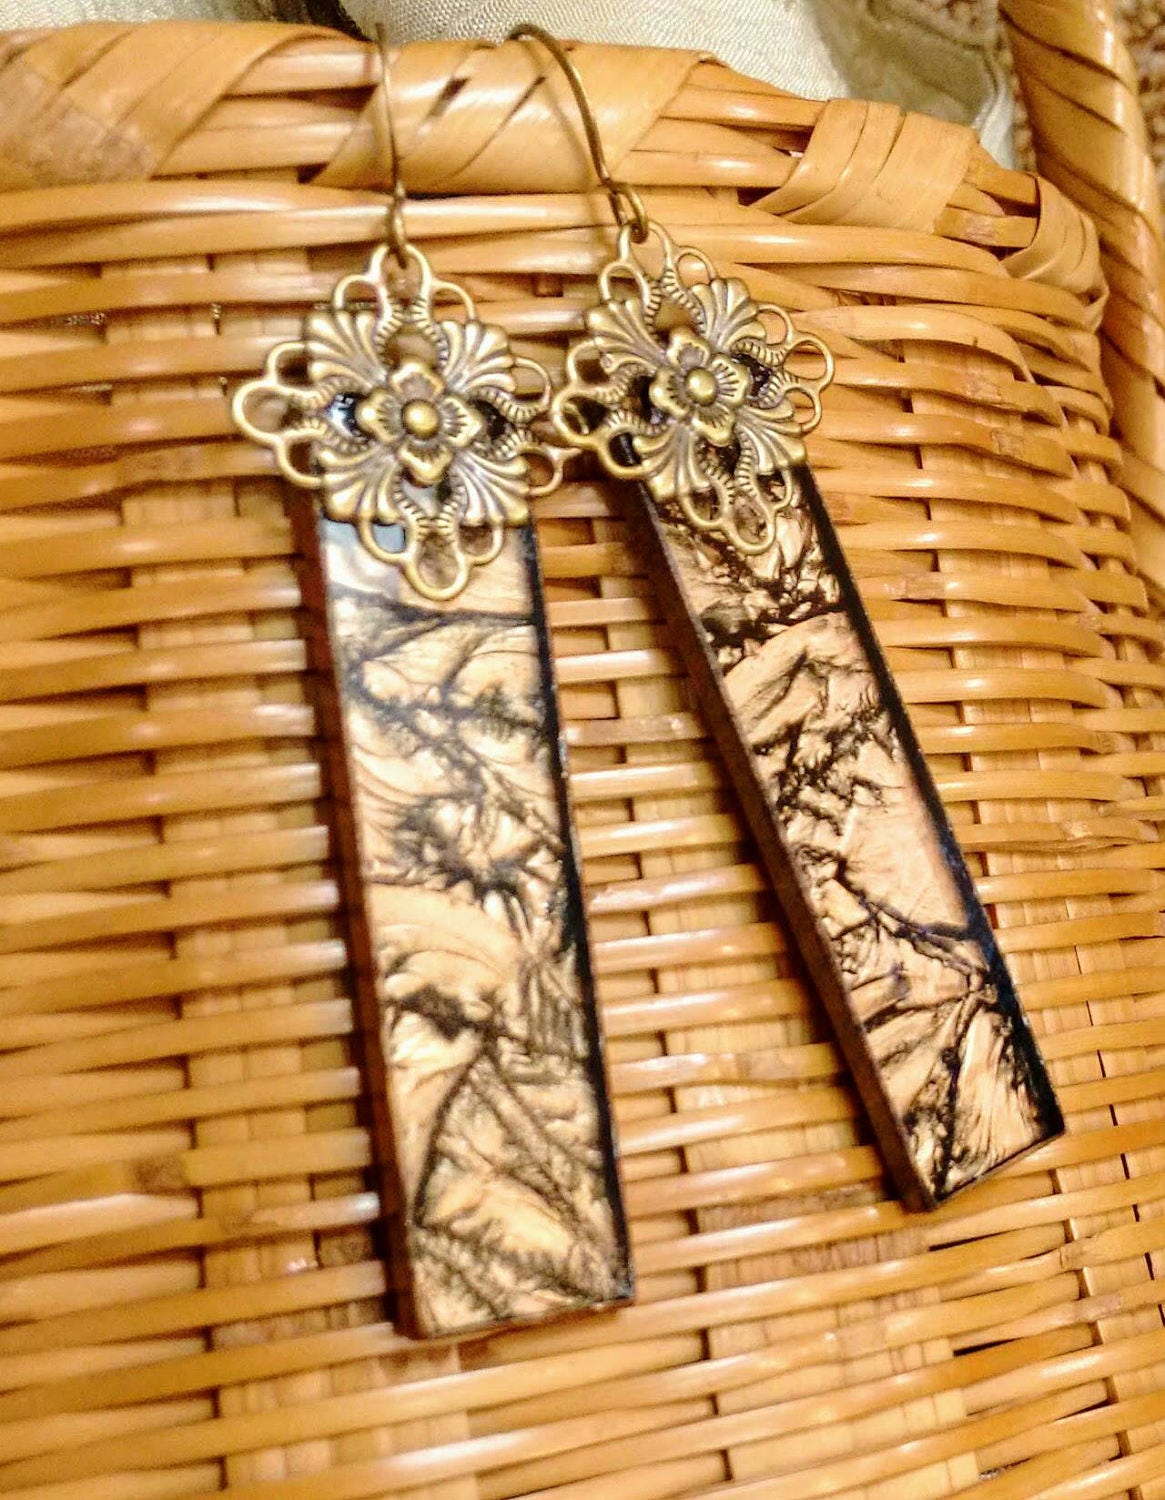 Bronze Van Gogh stained glass earrings